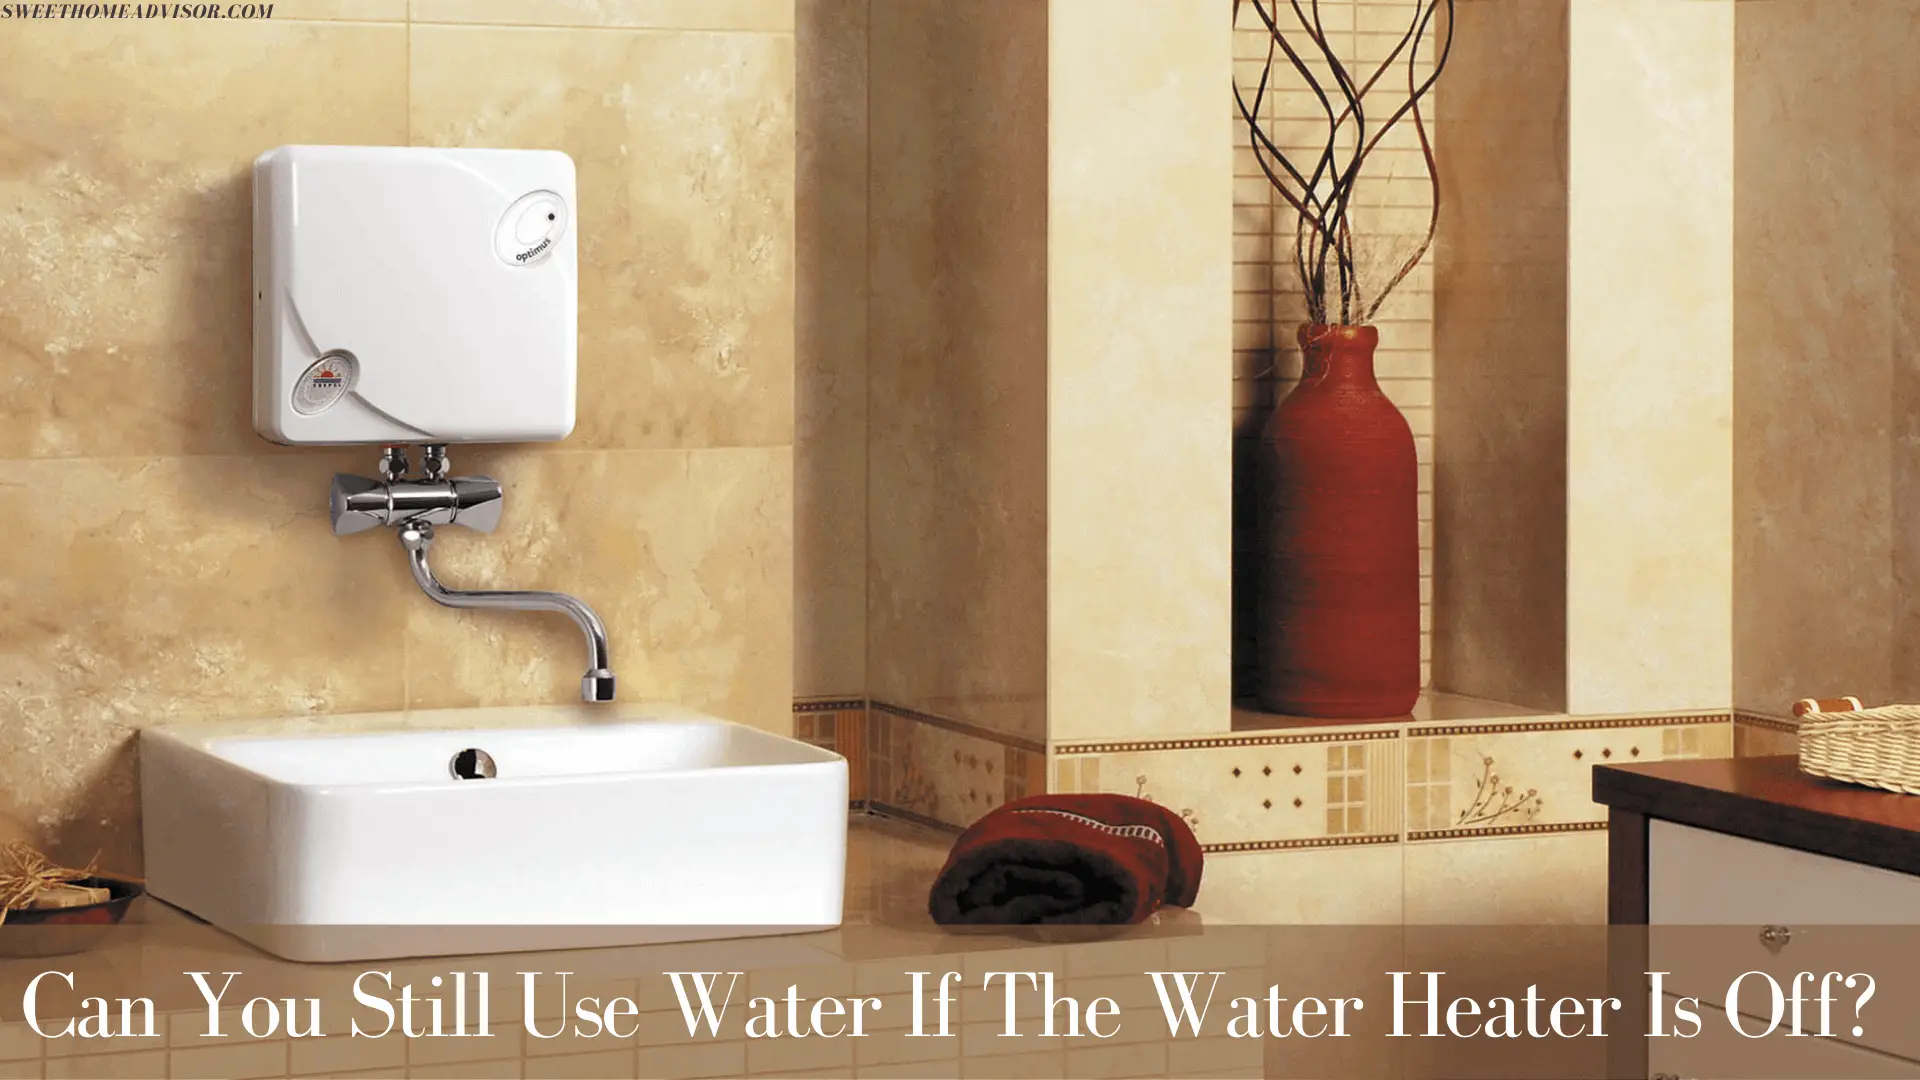 Can You Still Use Water If The Water Heater Is Off